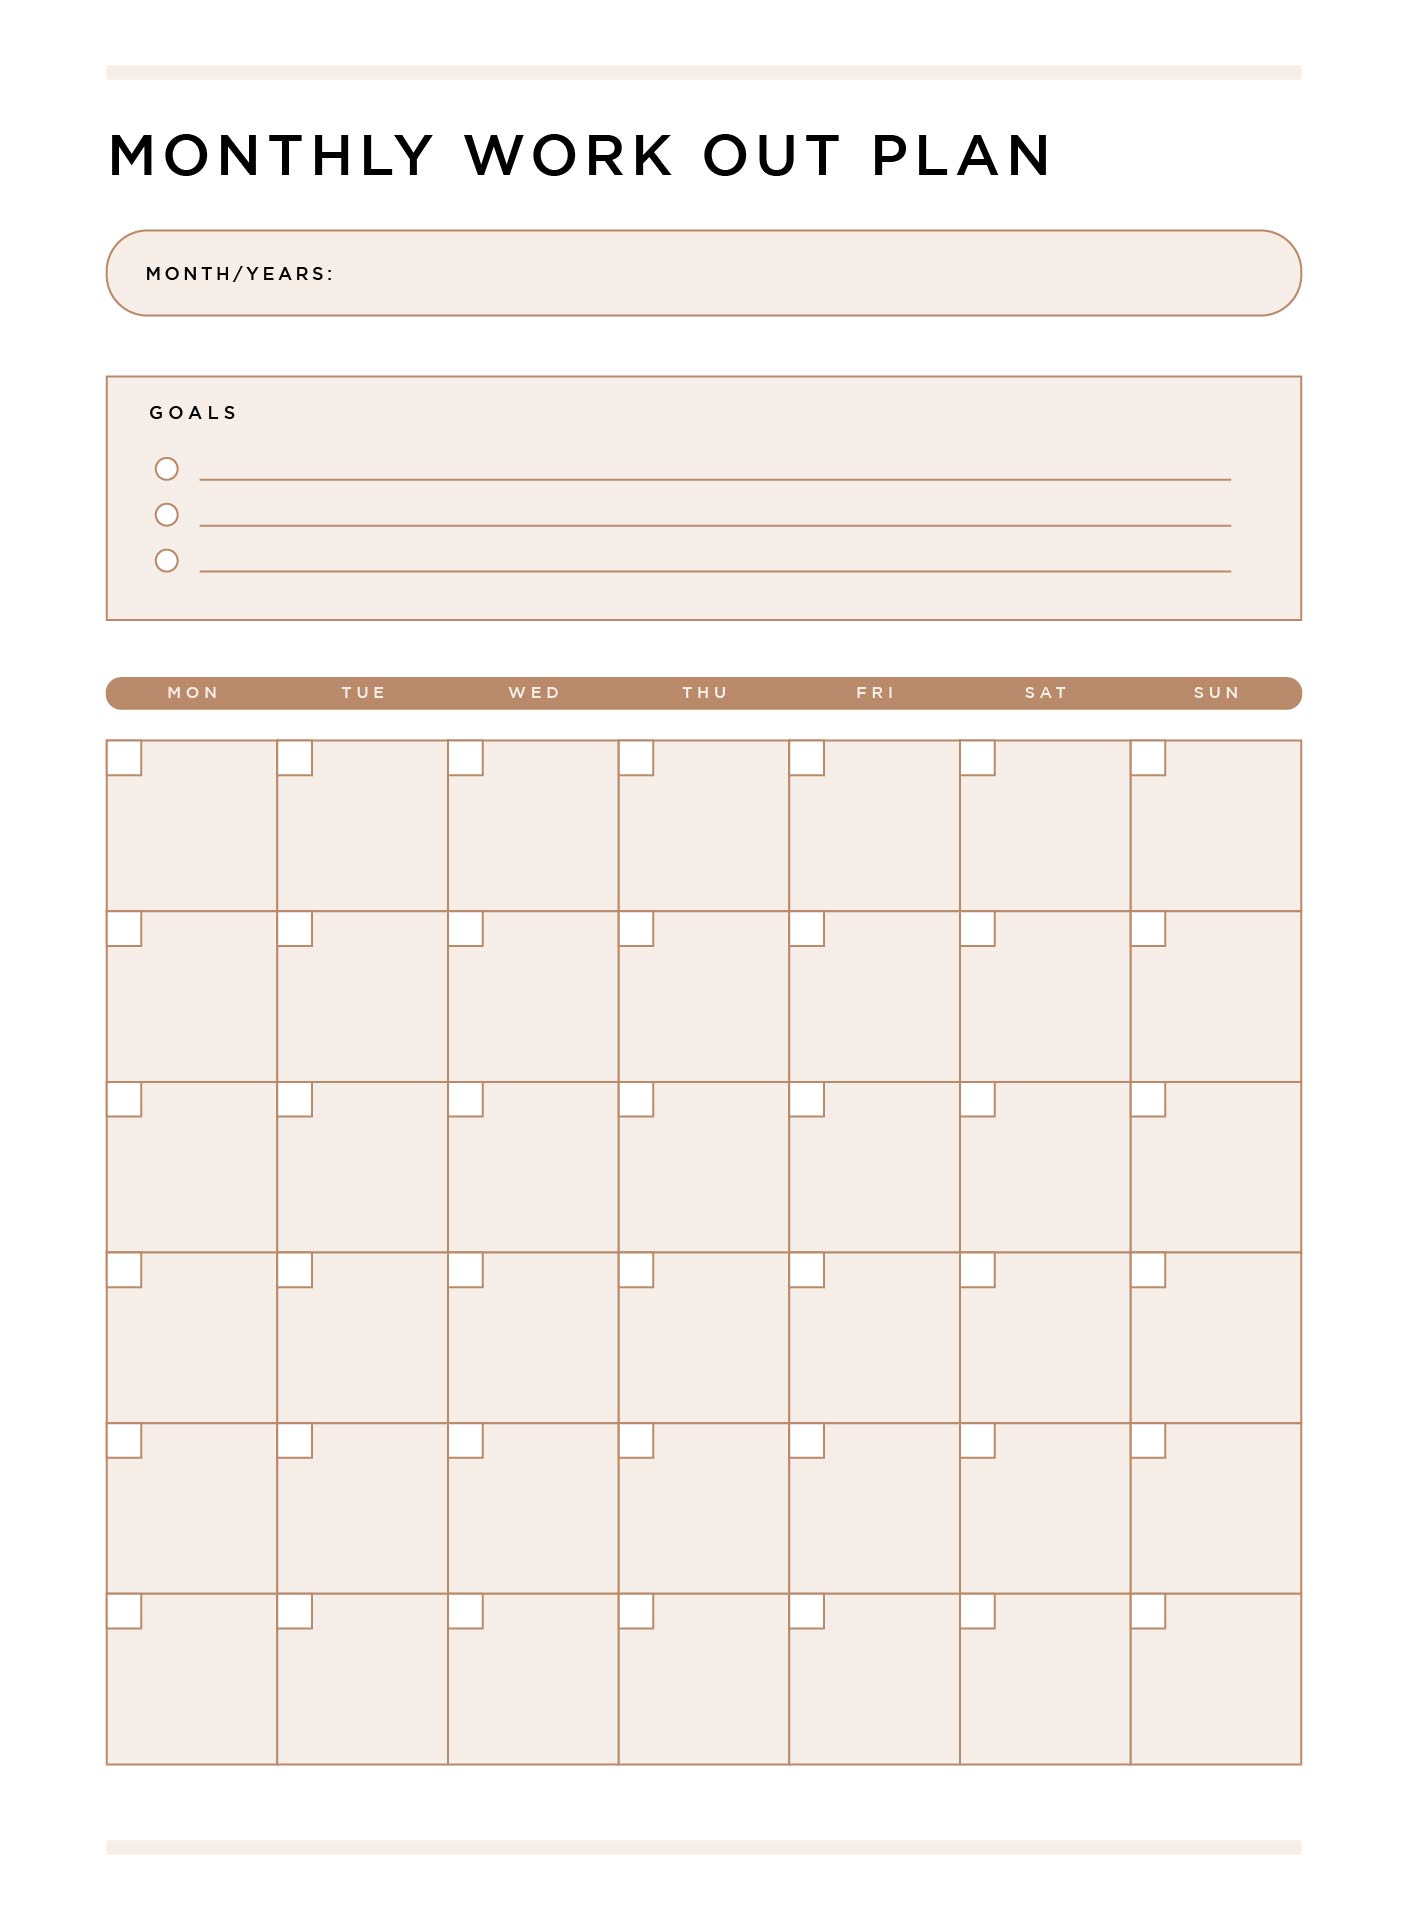 8-best-images-of-printable-workout-log-monthly-free-printable-workout